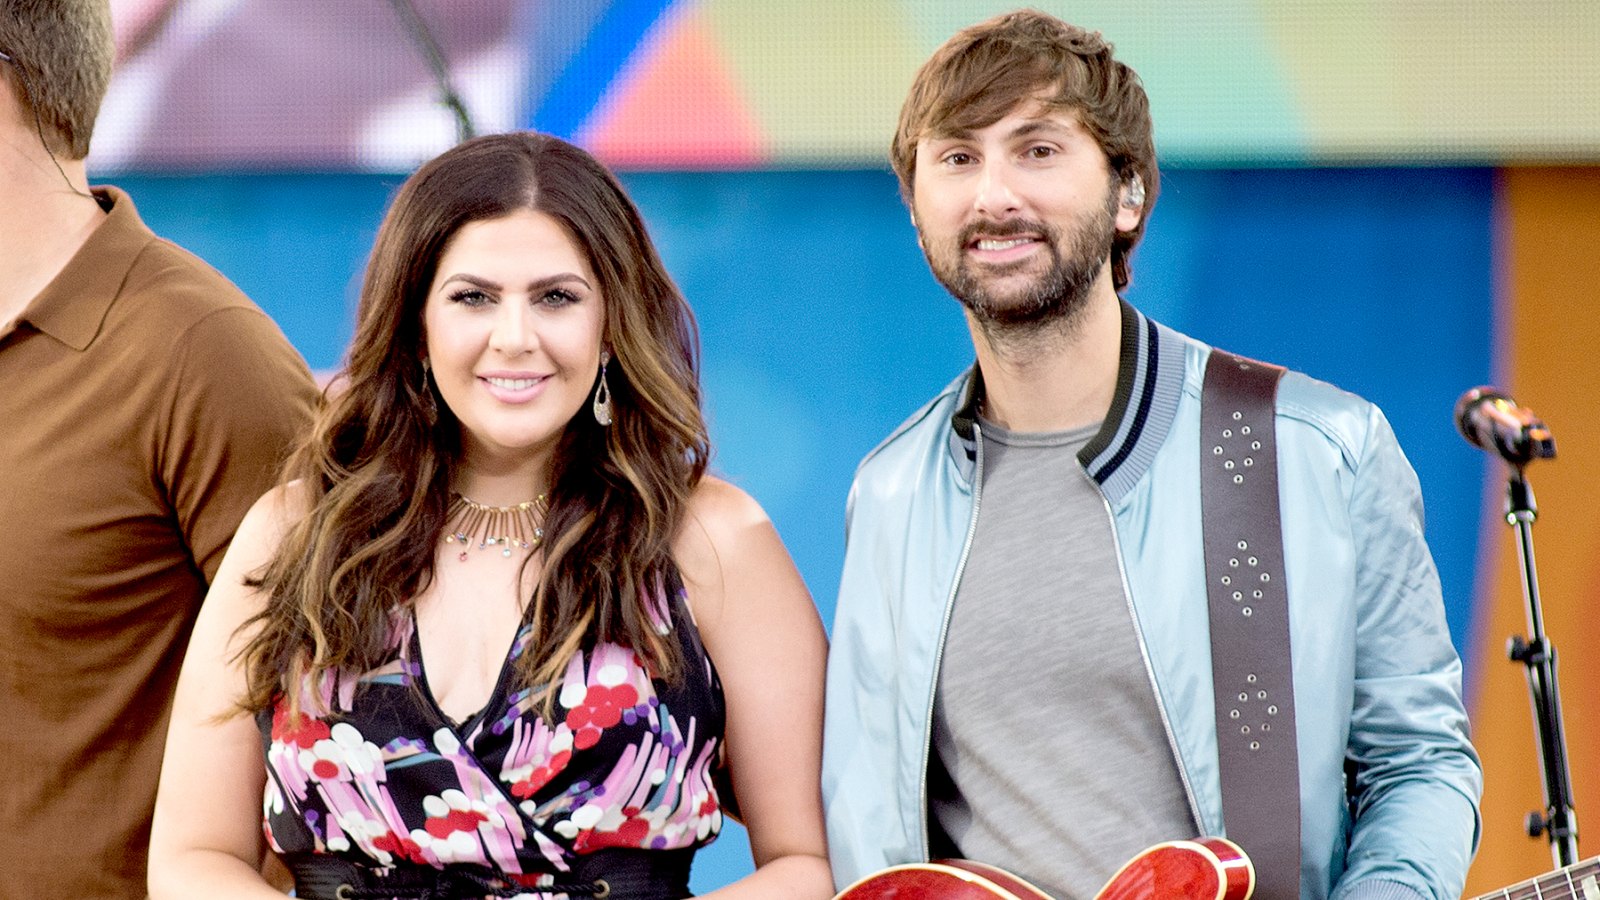 Hillary Scott and Dave Haywood of Lady Antebellum performs on ABC's "Good Morning America" at Rumsey Playfield on July 14, 2017 in New York City.